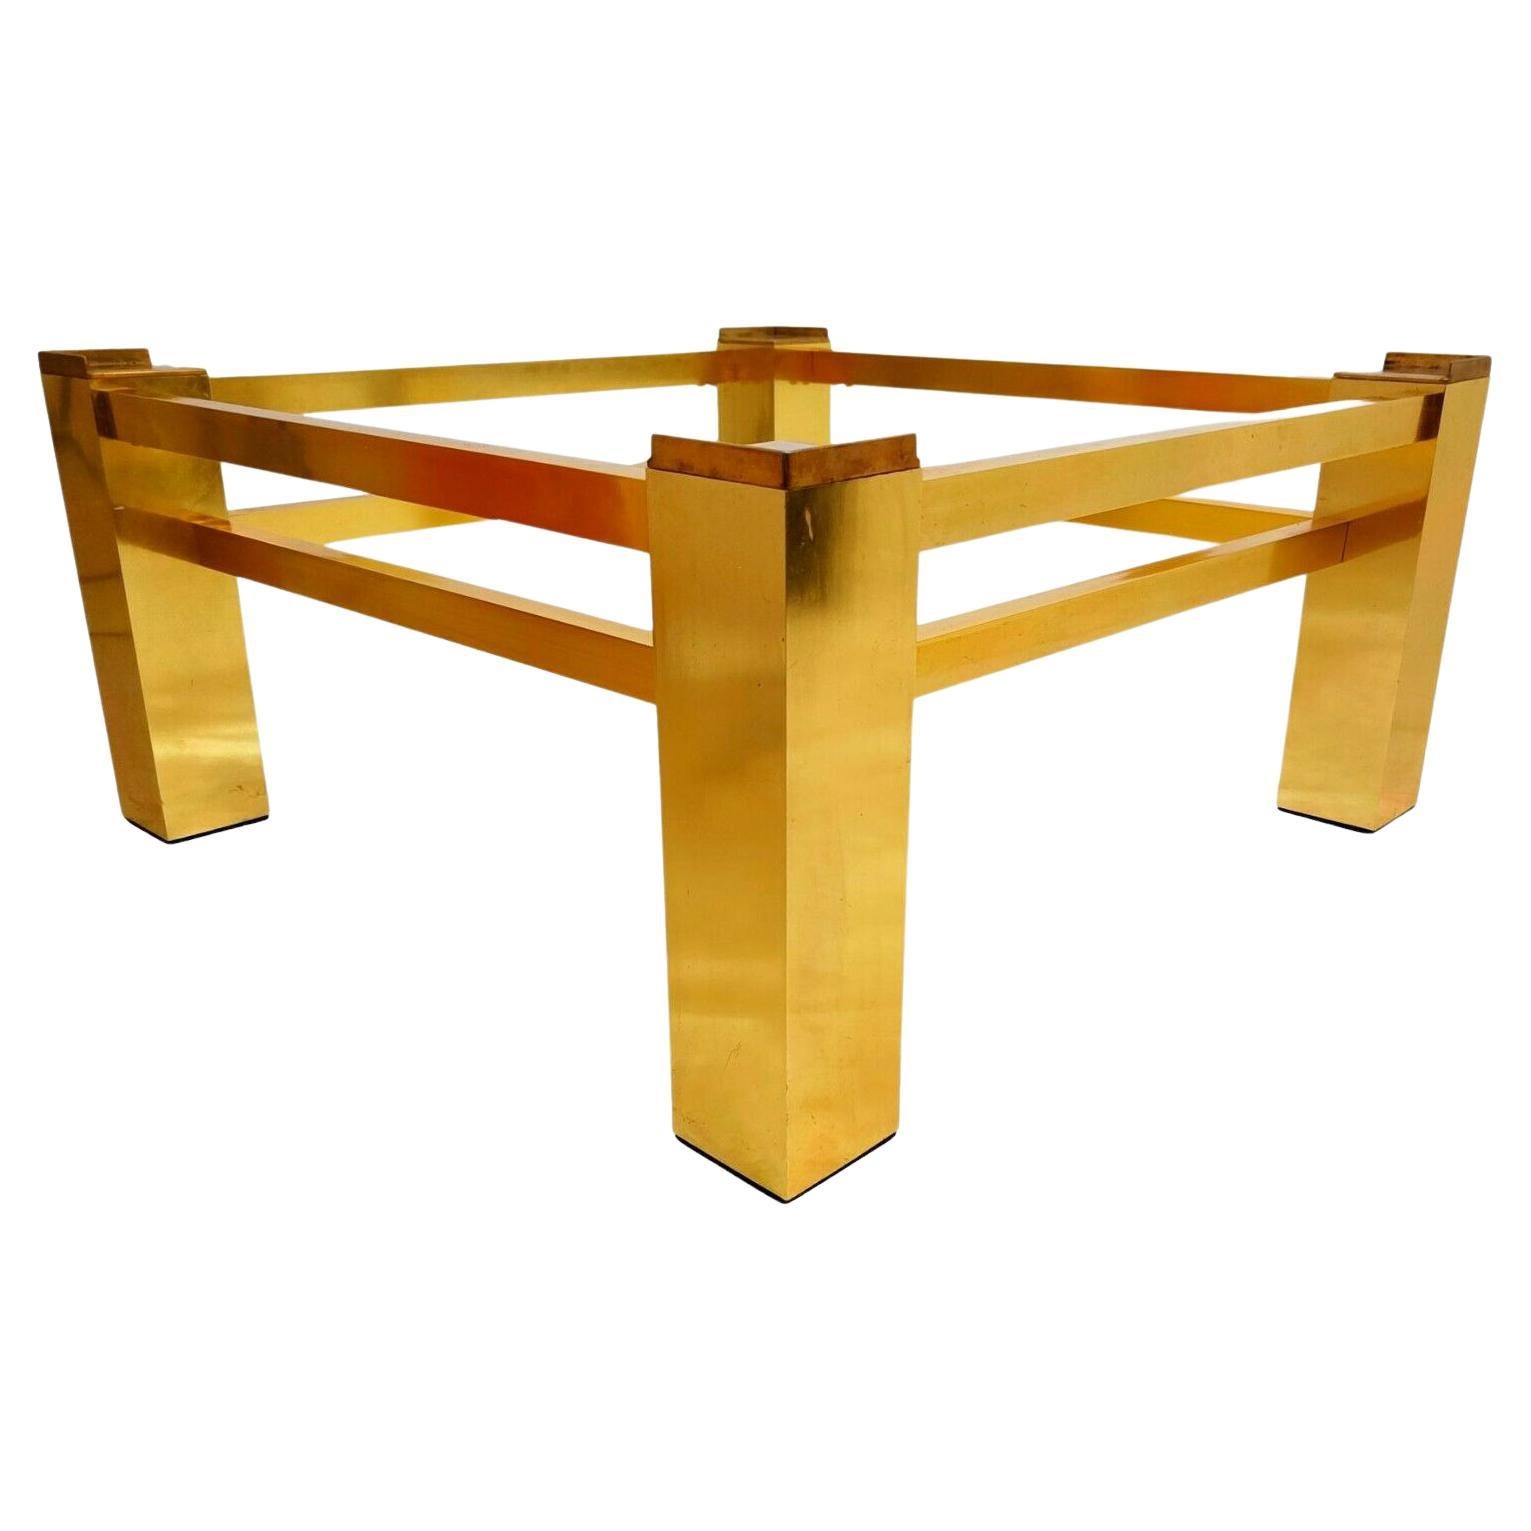 Original Gilded Aluminum Coffee Table, 1970s For Sale